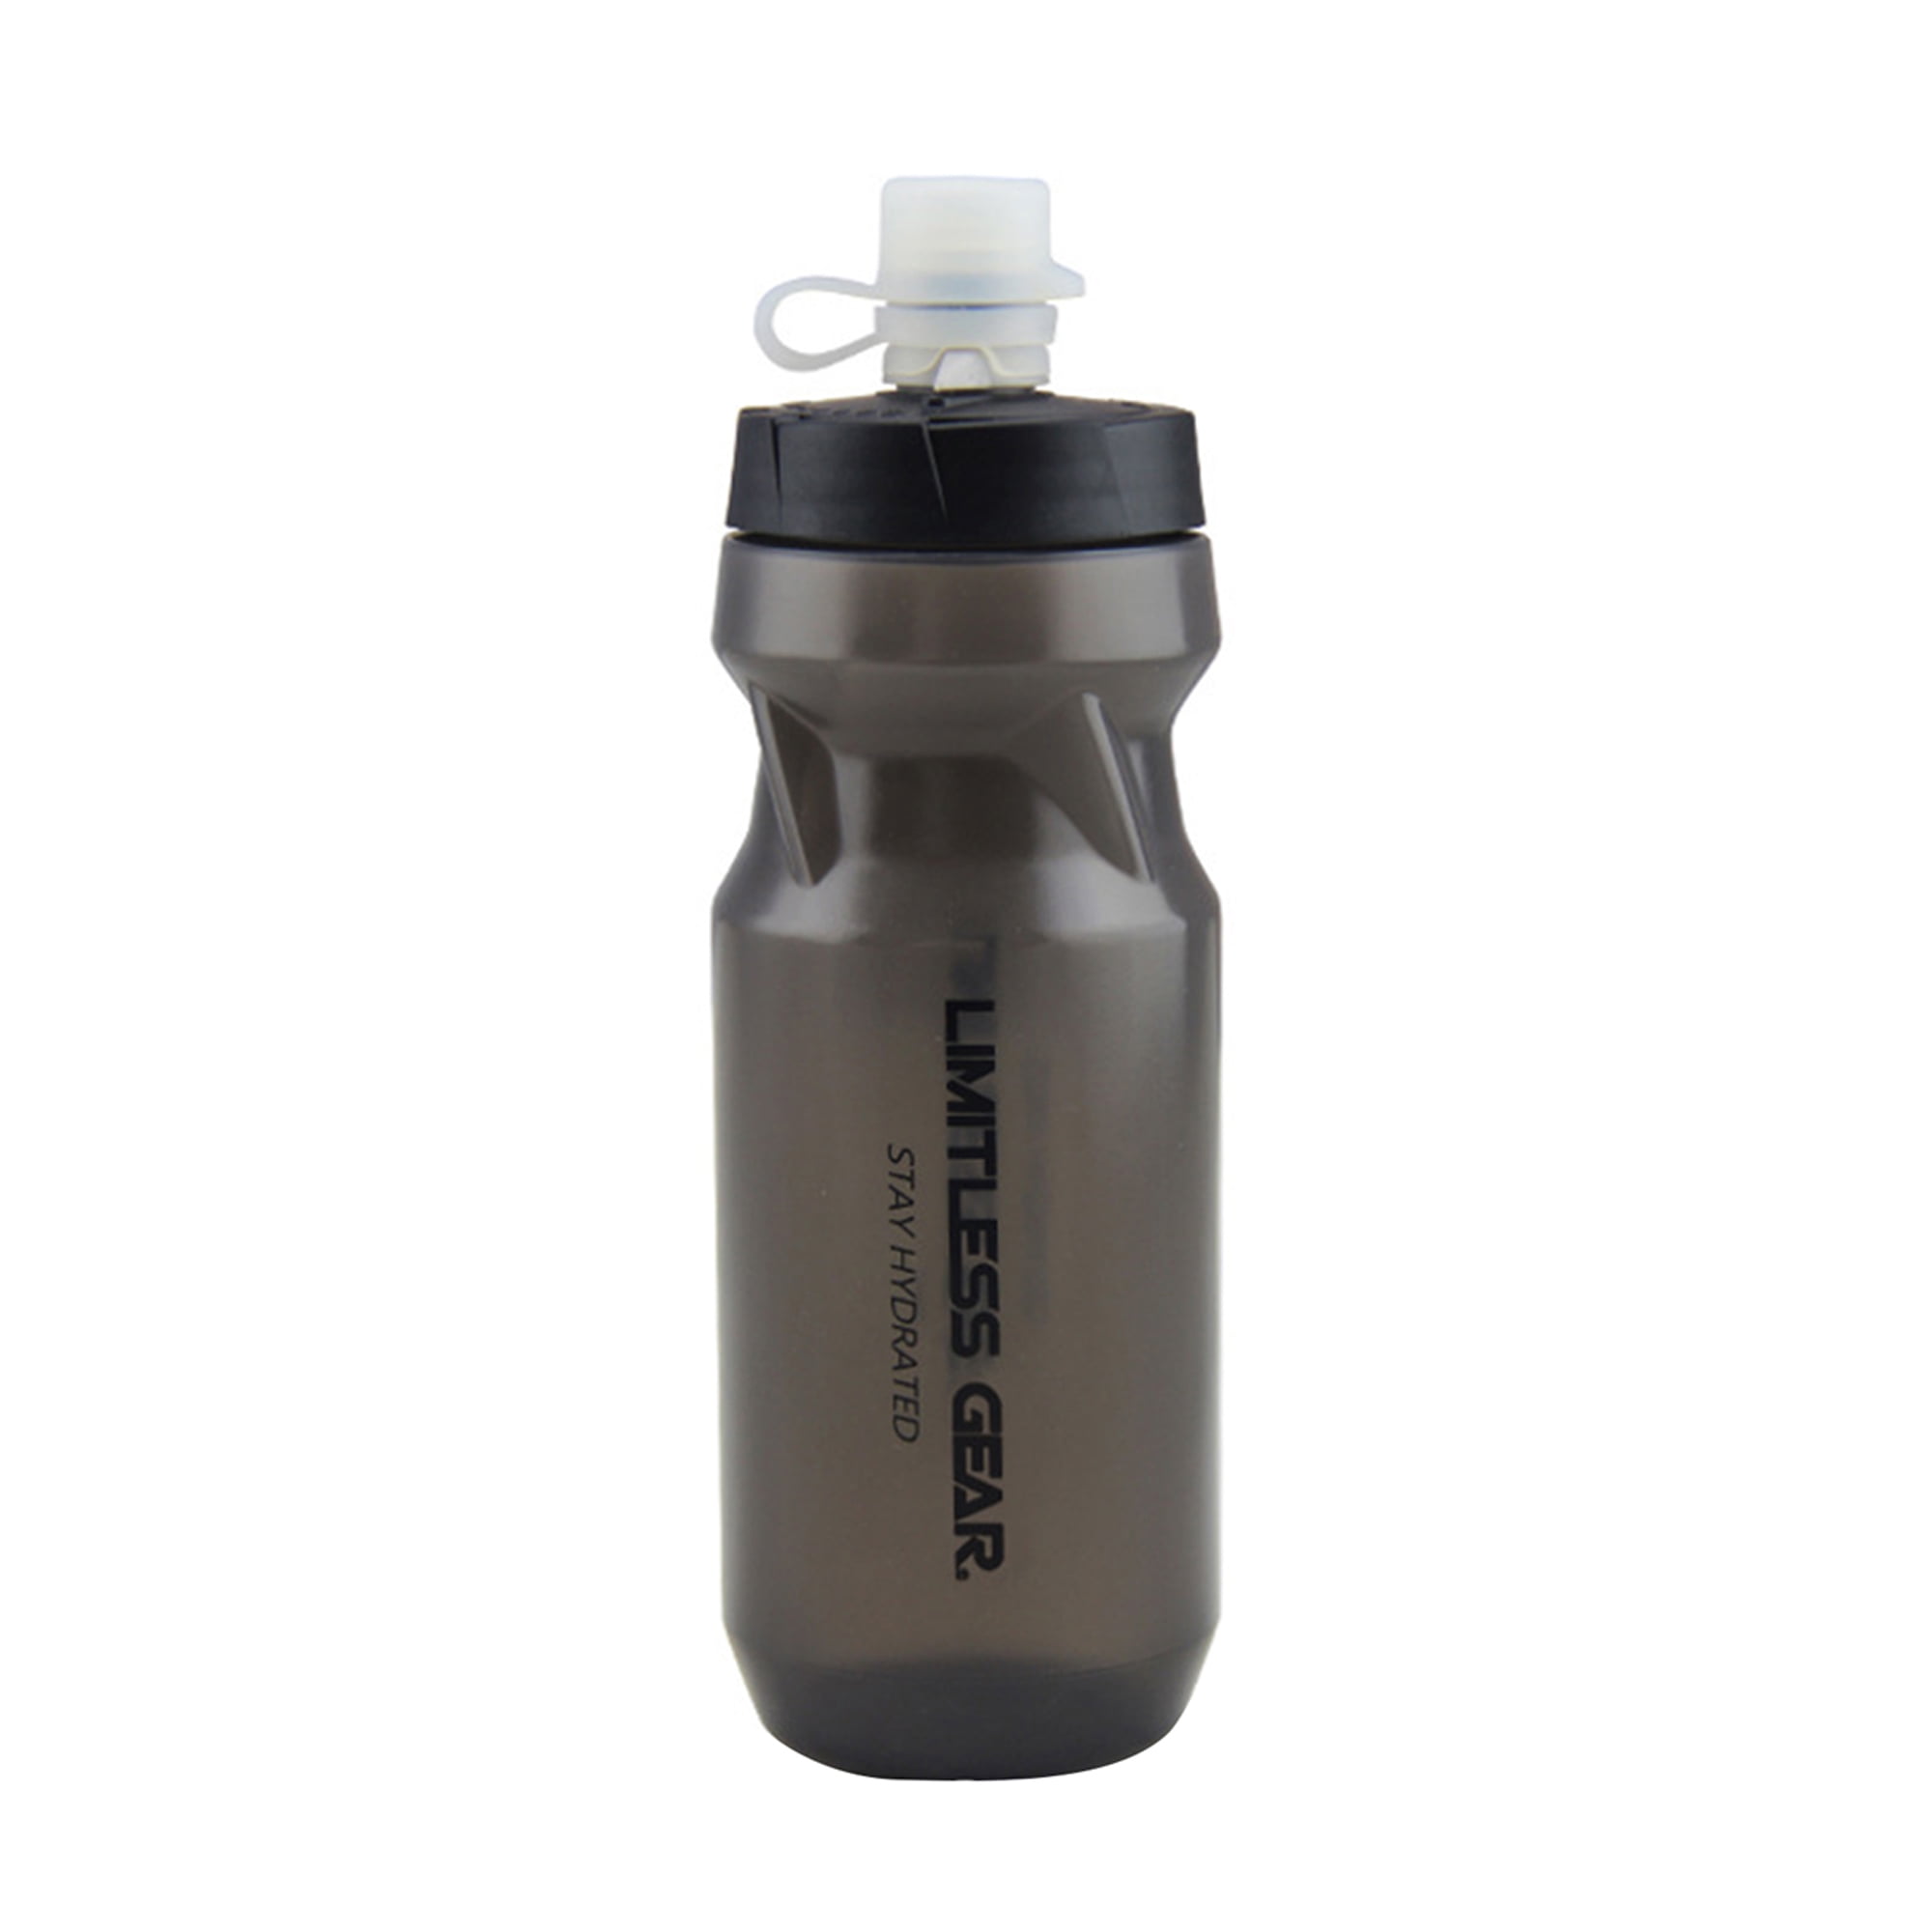 Stainless Steel Water Bottle Non Insulated Leak Proof Sports Jug Hiking Travel 